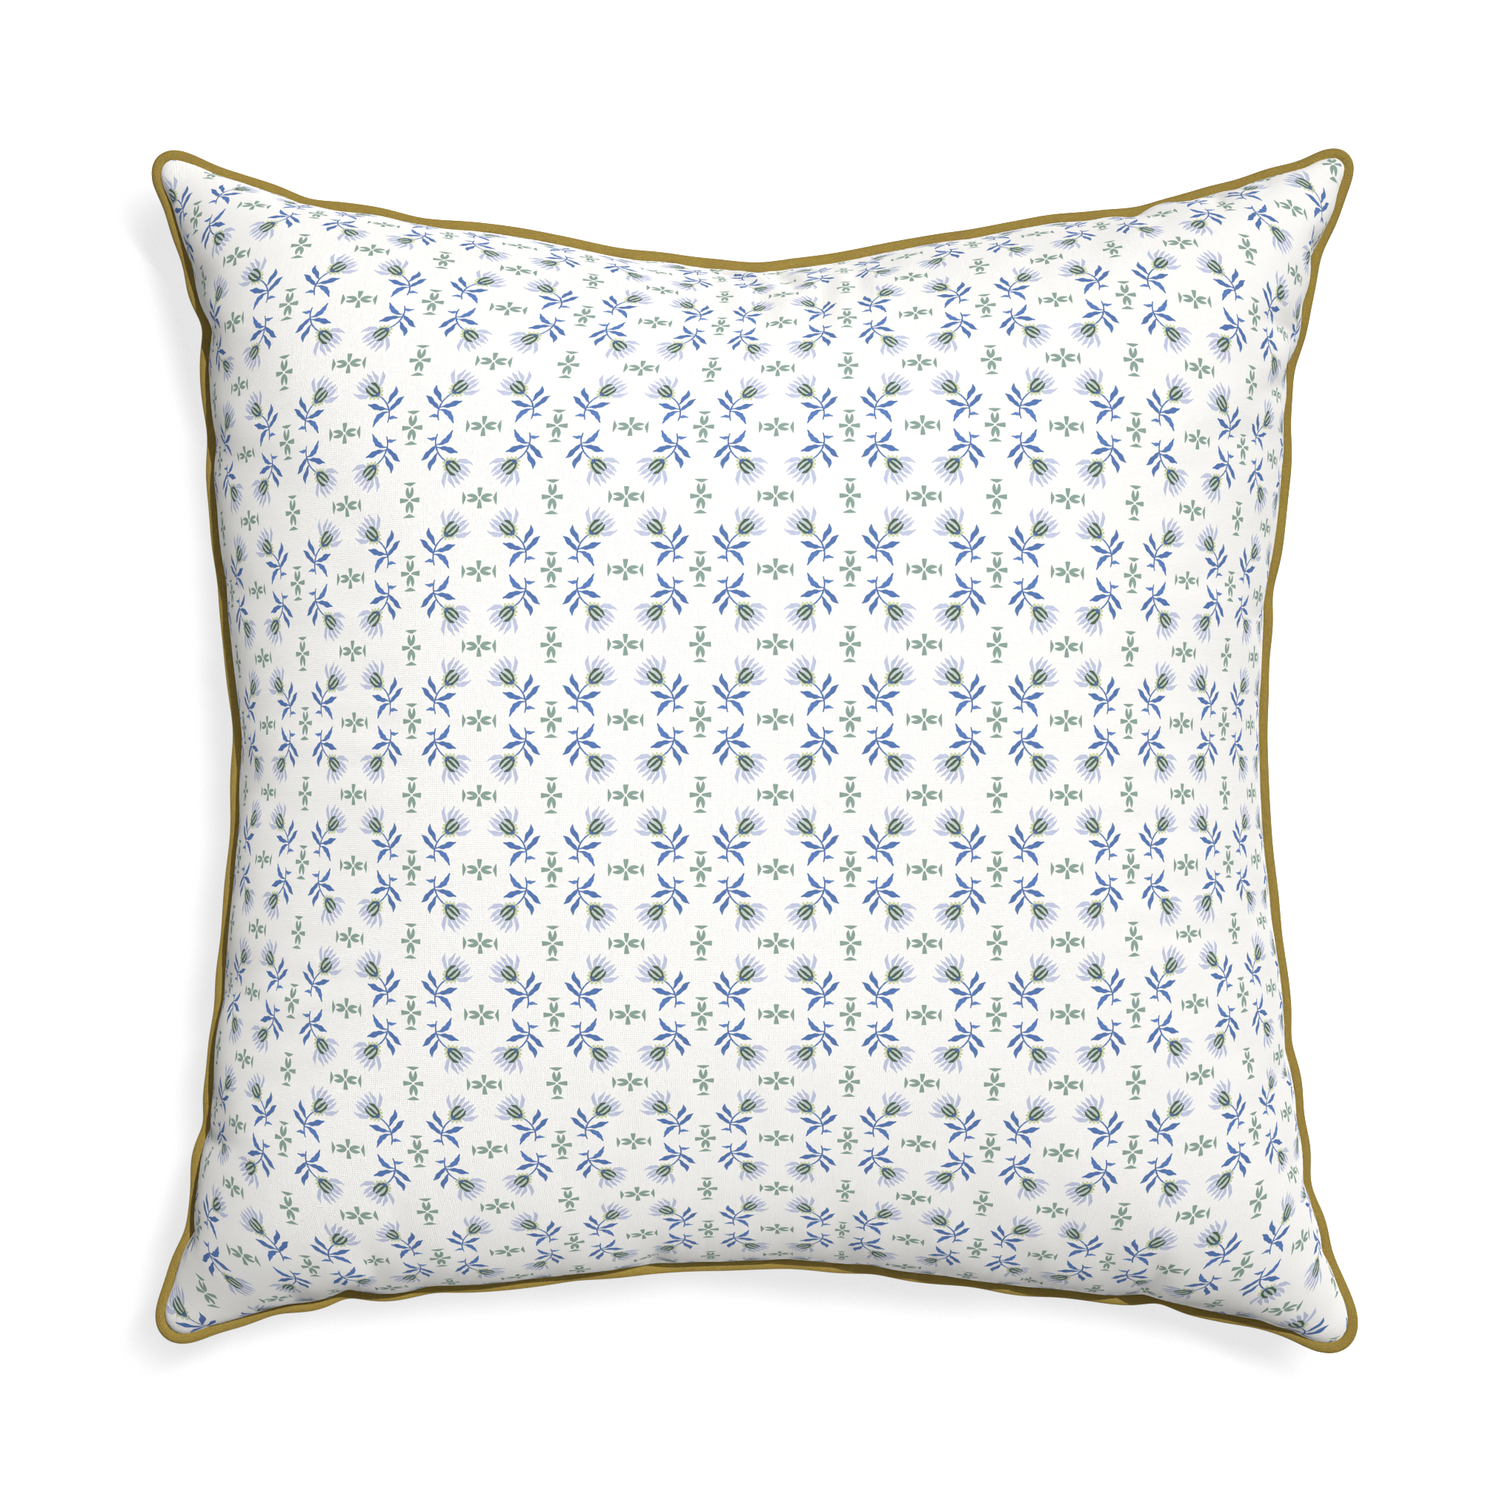 Euro-sham lee custom blue & green floralpillow with c piping on white background